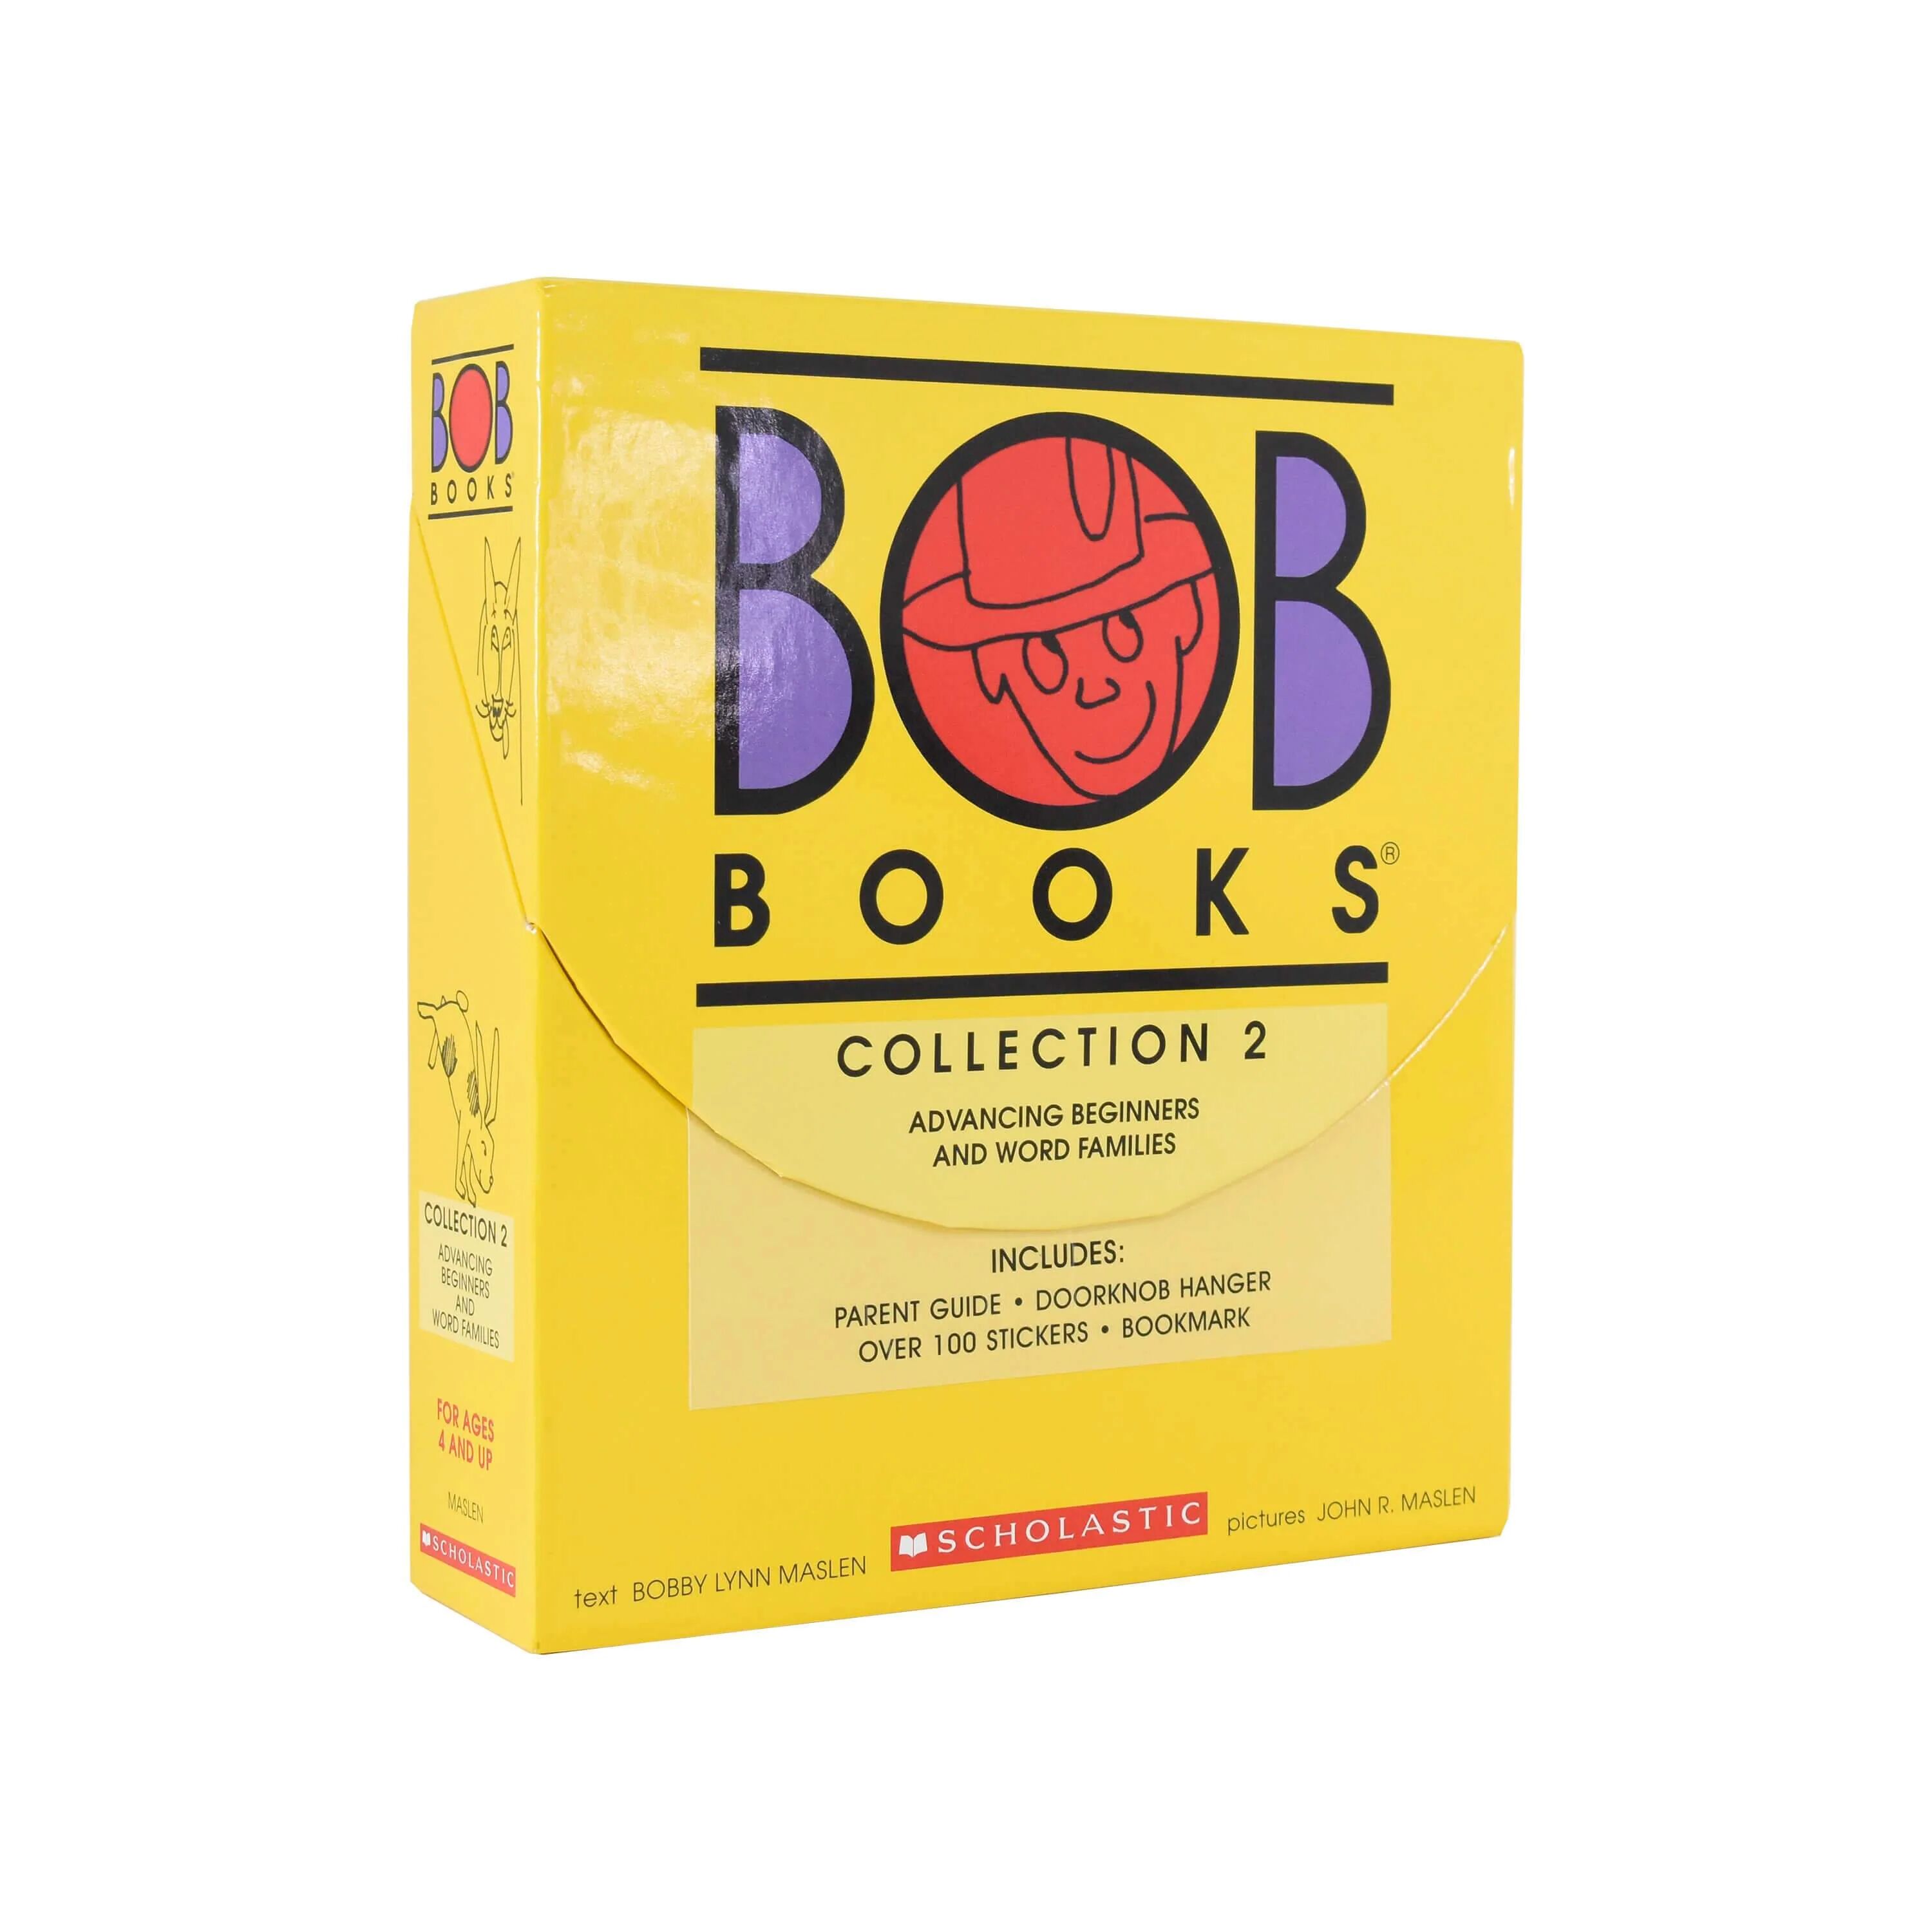 Bob Books Collection Box 2 Advancing Beginners and Word Families 16 Books - Paperback Scholastic